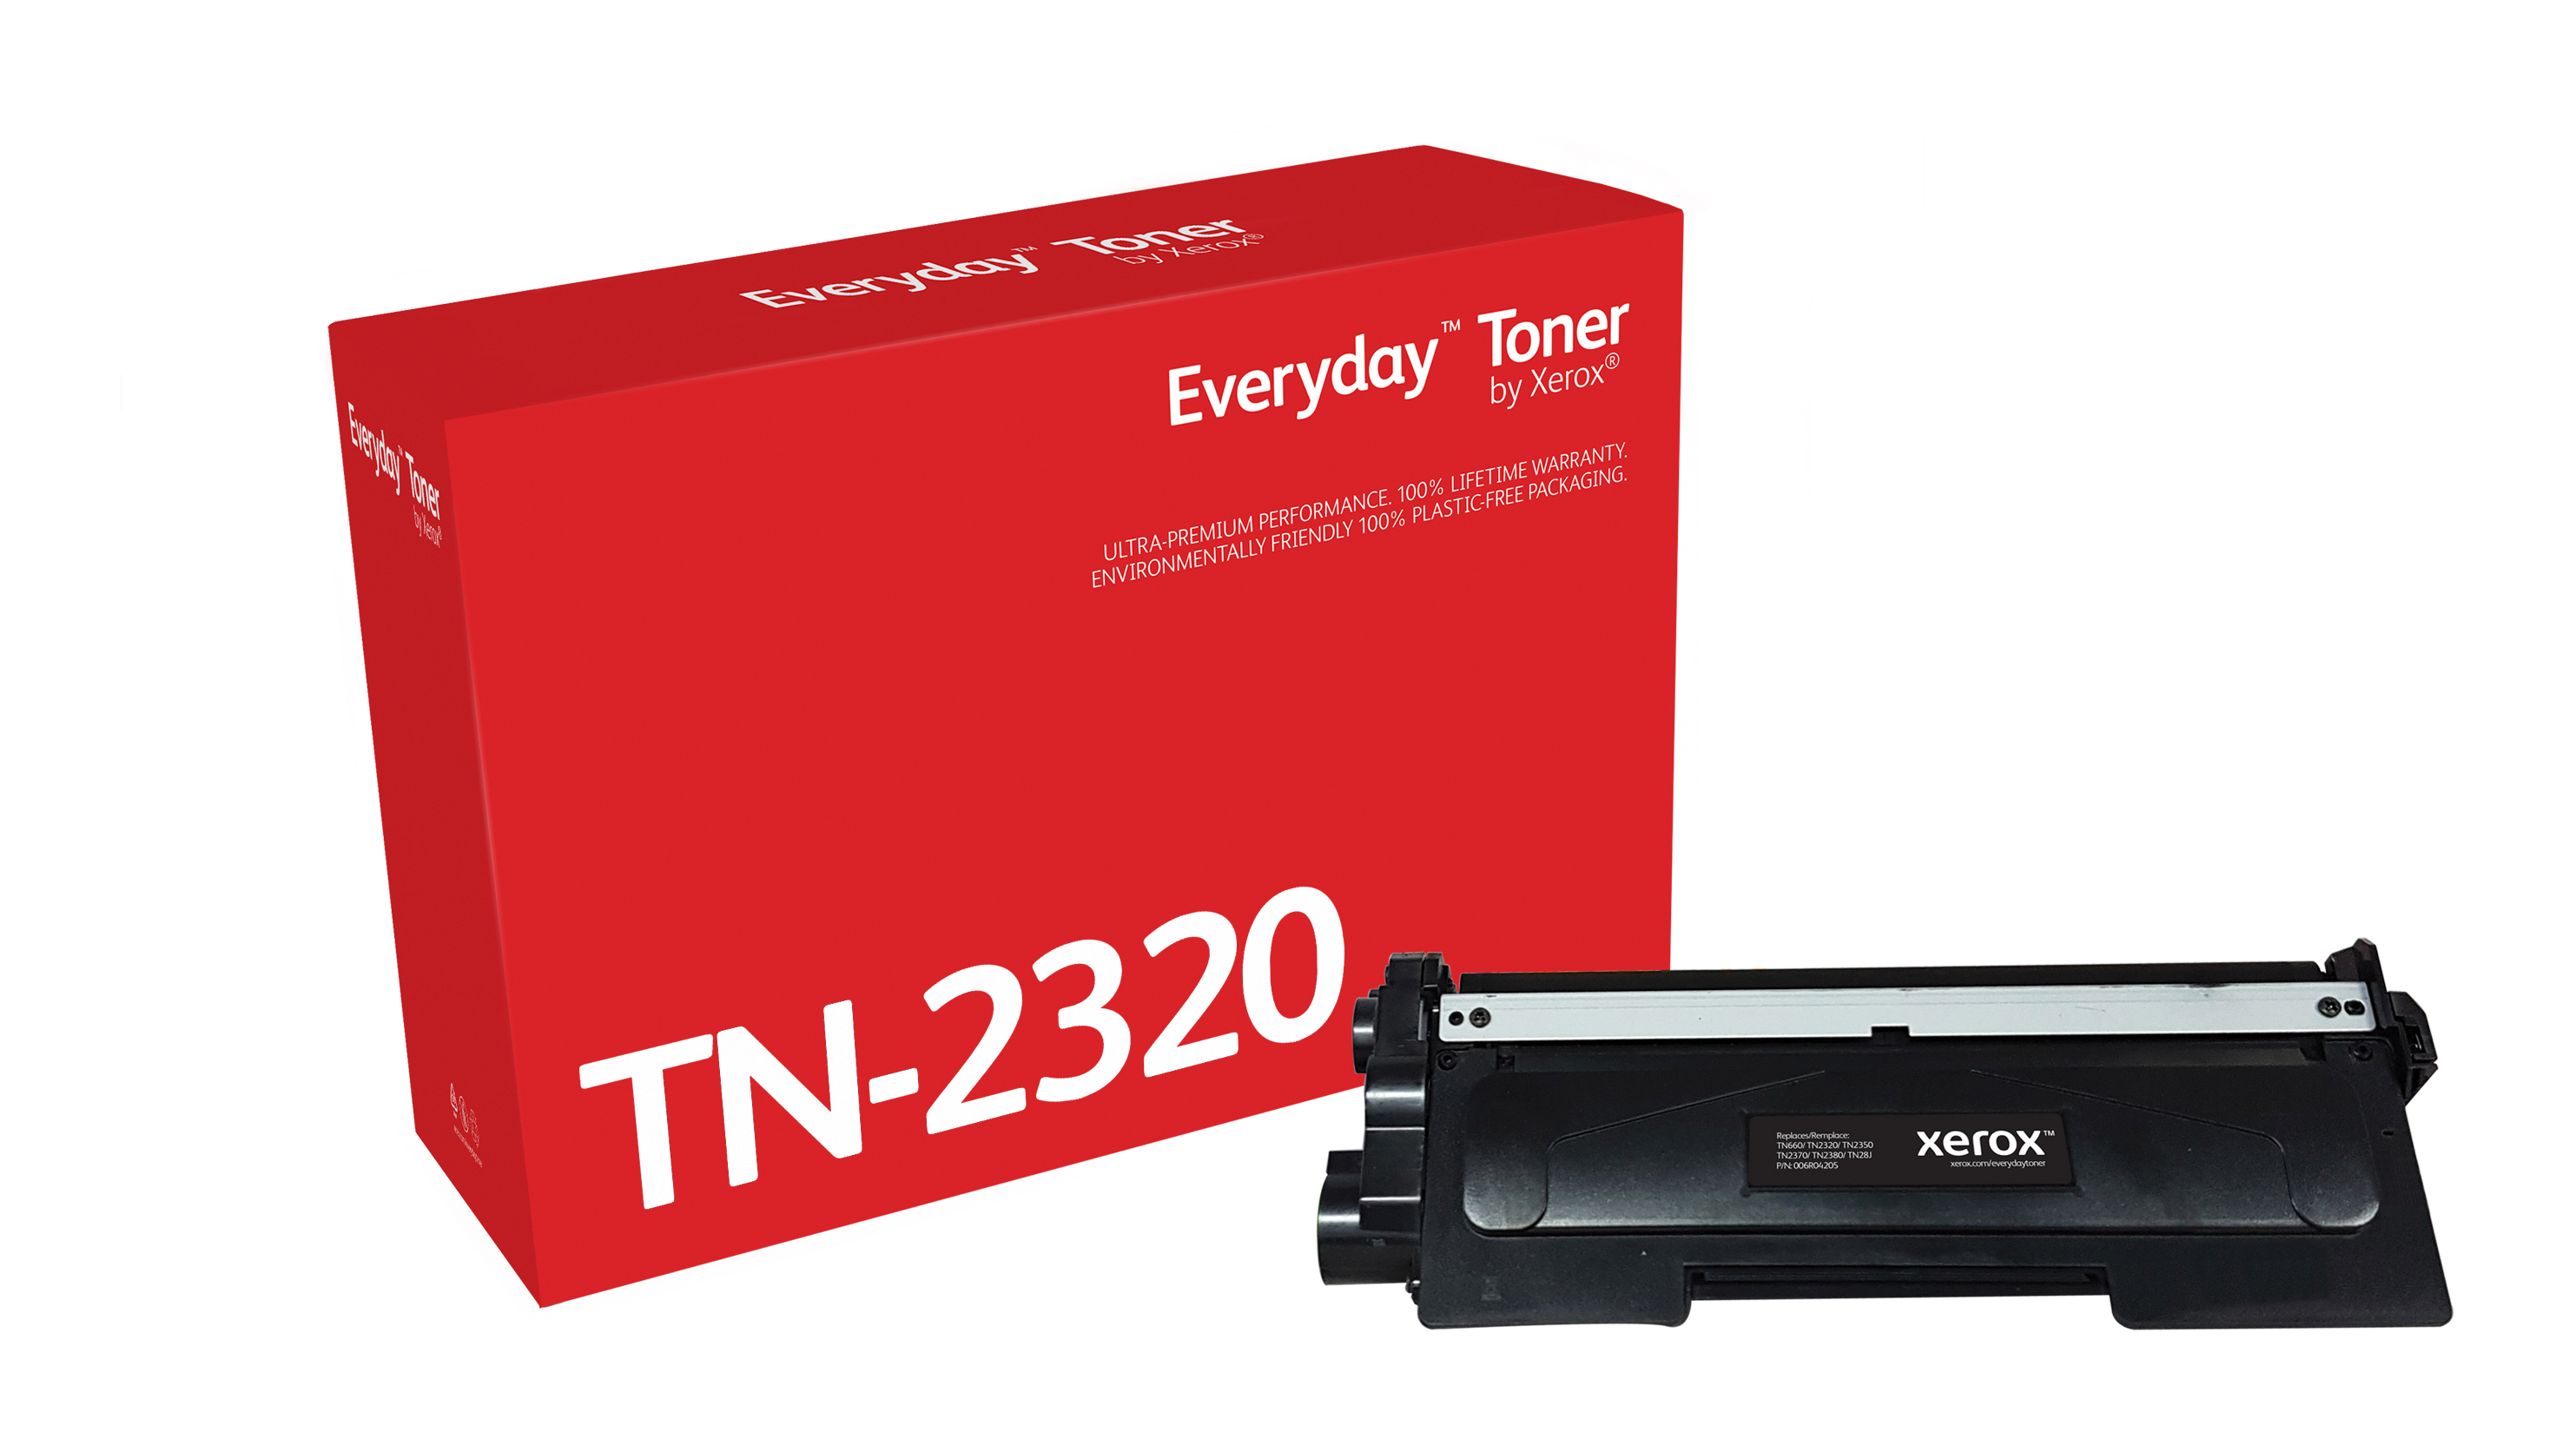 Everyday Mono Toner compatible with Brother TN-2320 006R04205 by Xerox